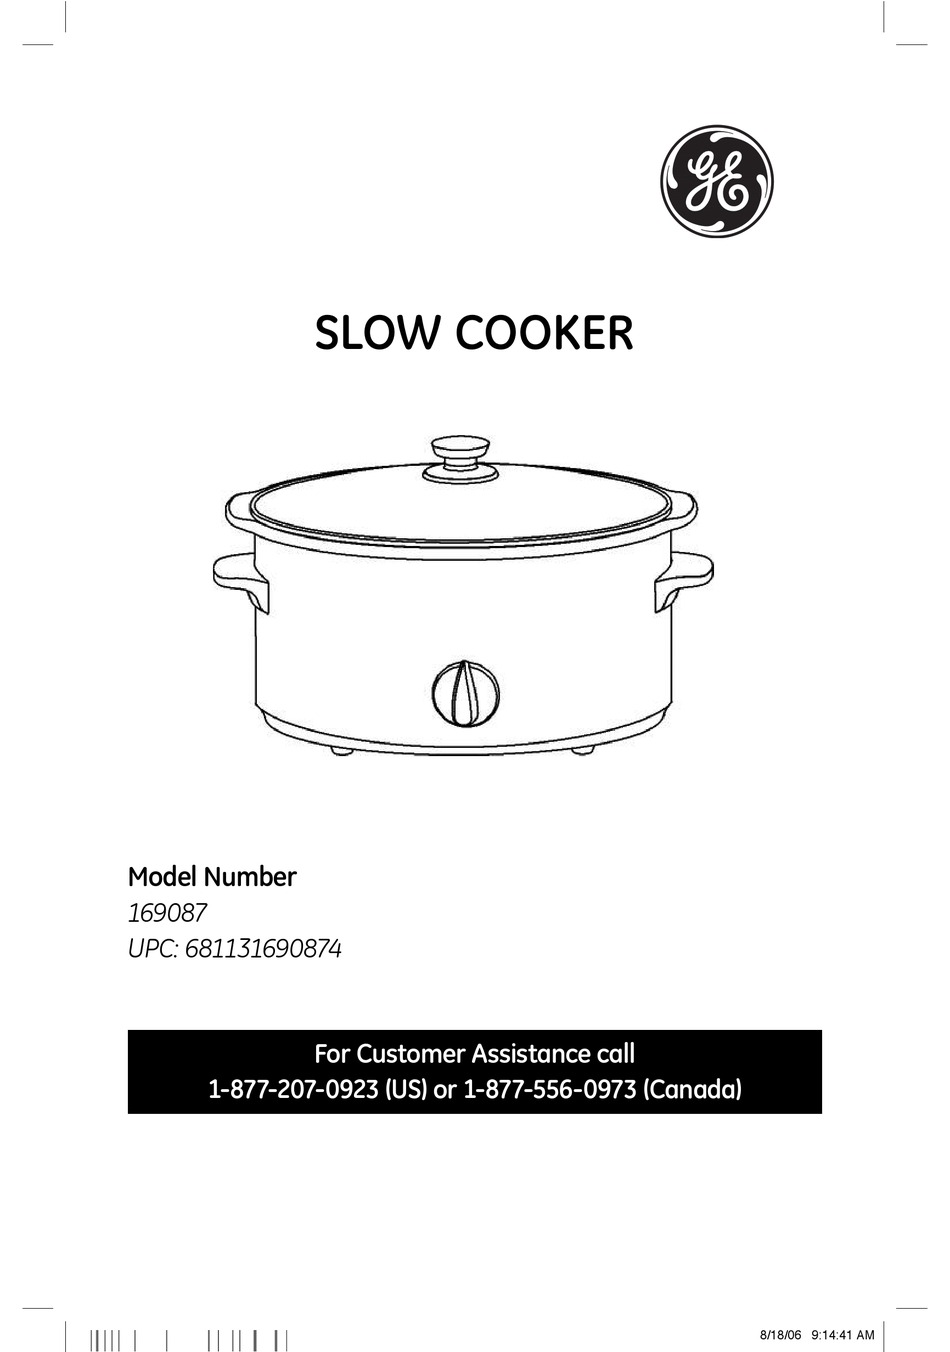 GE Slow Cooker 898680 User Guide